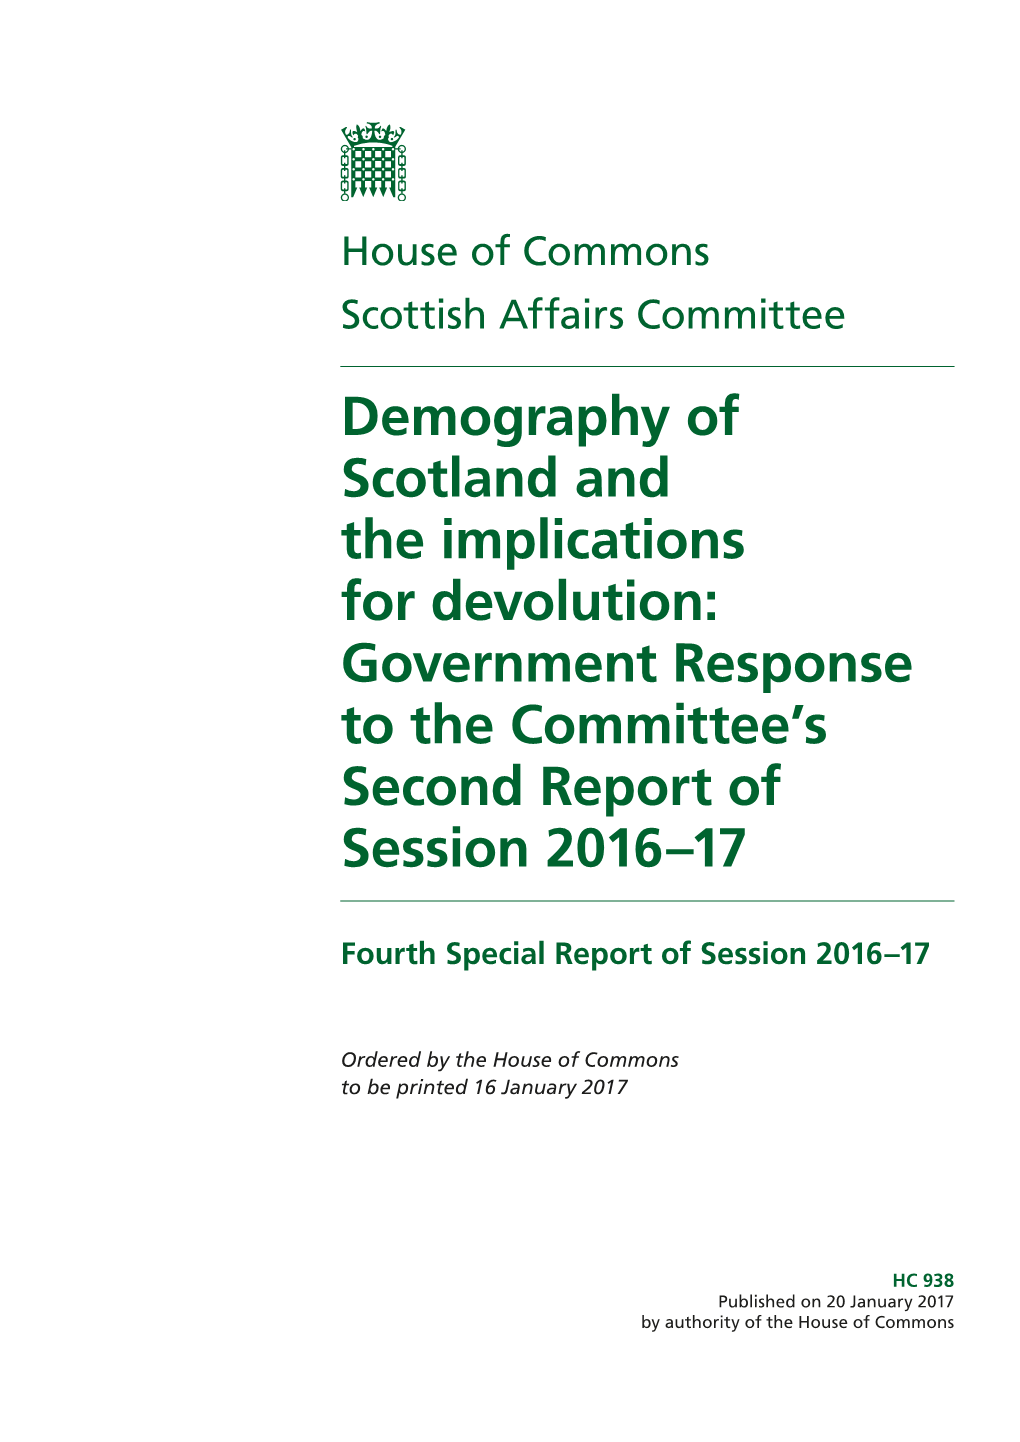 Demography of Scotland and the Implications for Devolution: Government Response to the Committee’S Second Report of Session 2016–17